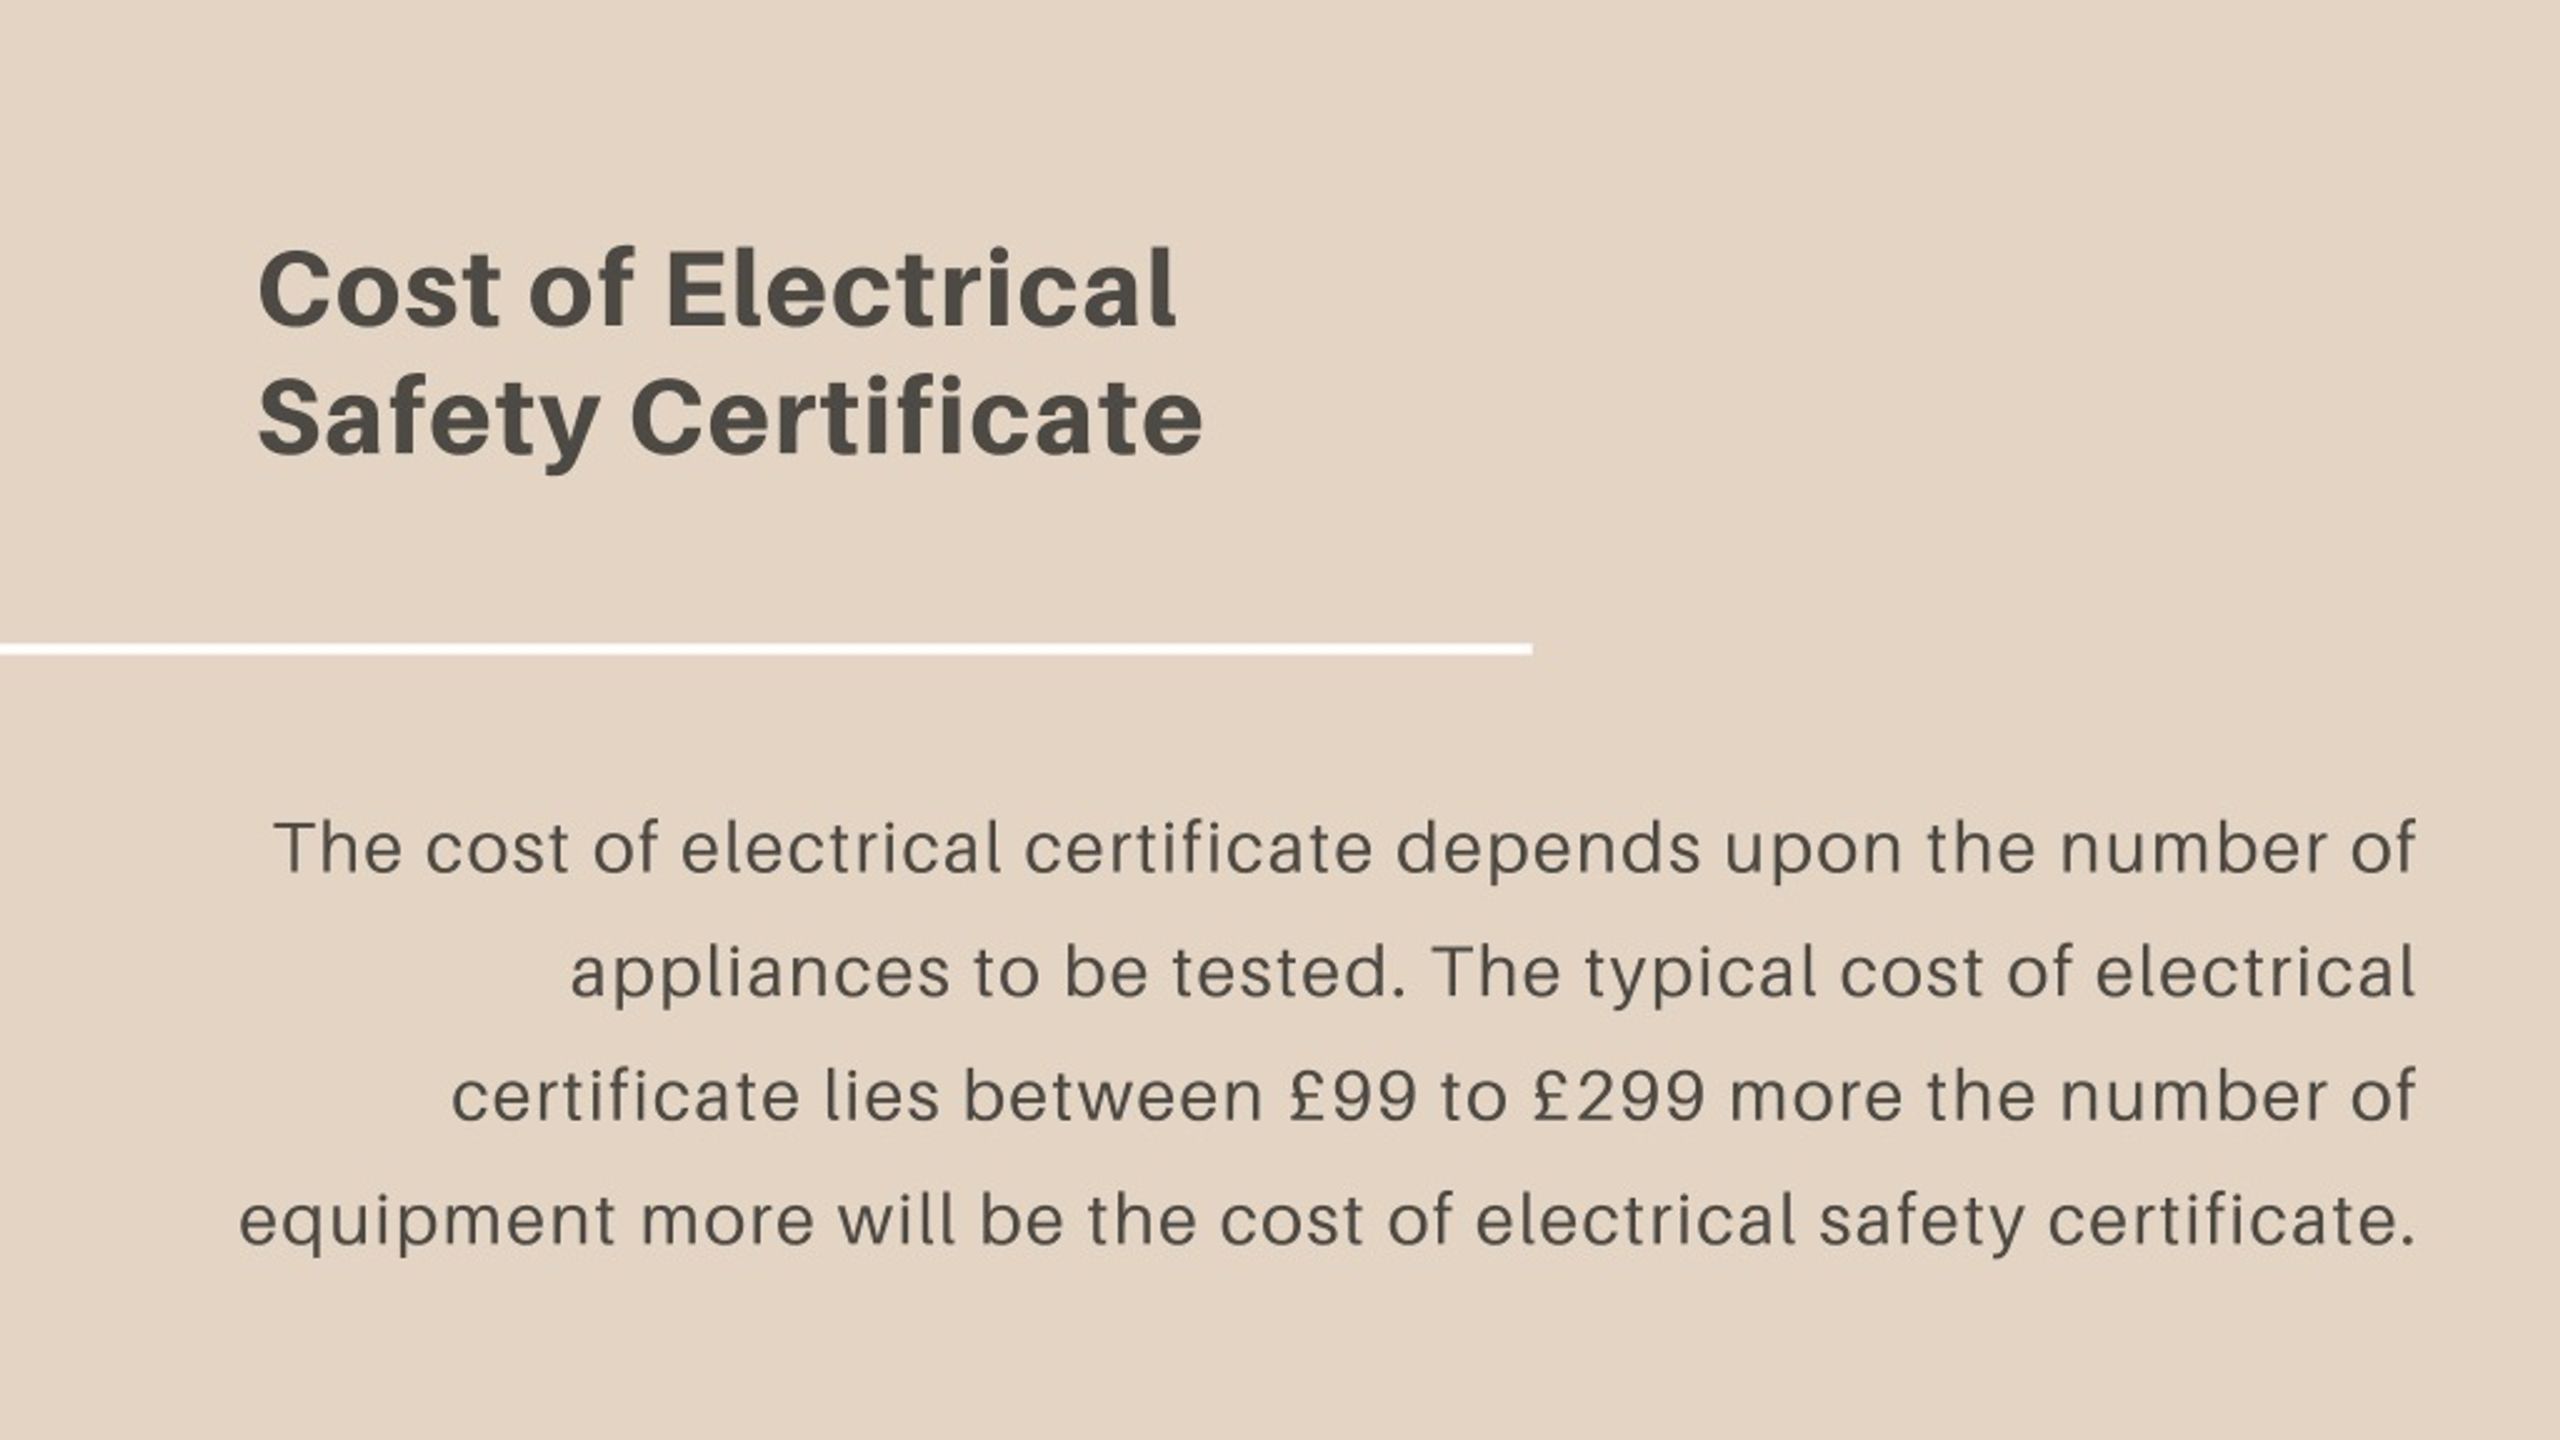 PPT Electrical certificate for Landlords in UK PowerPoint